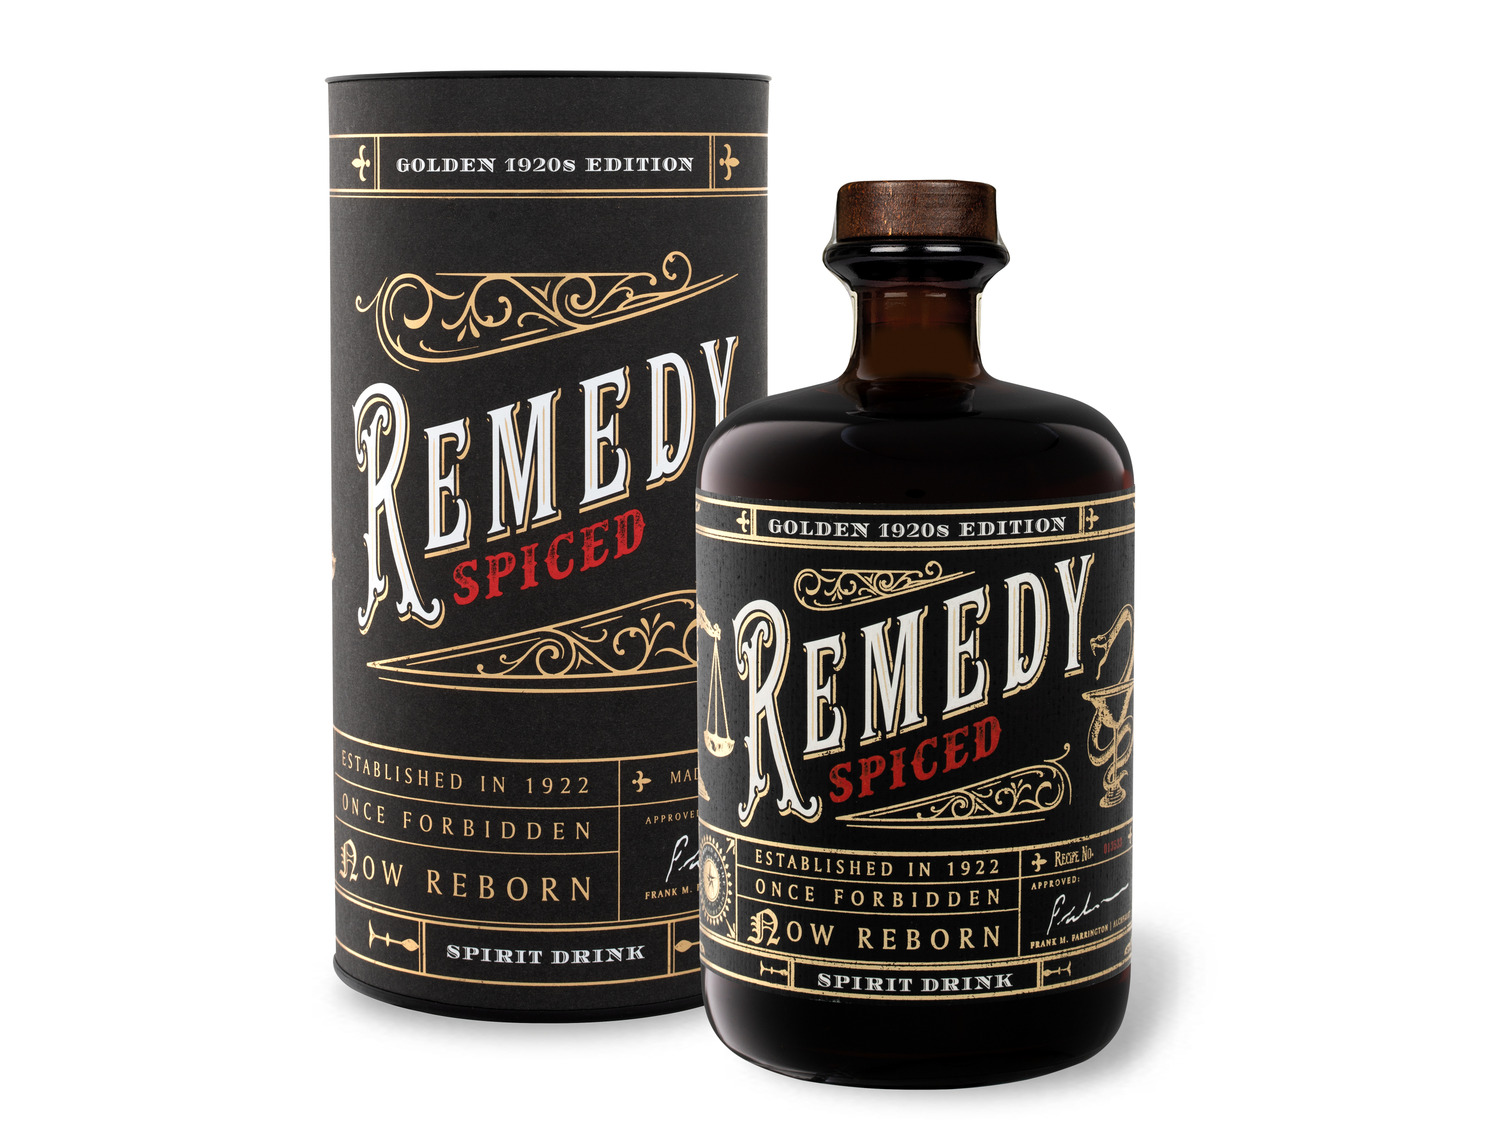 1920\'s Remedy Edition Ge… Golden mit Spiced (Rum-Basis)